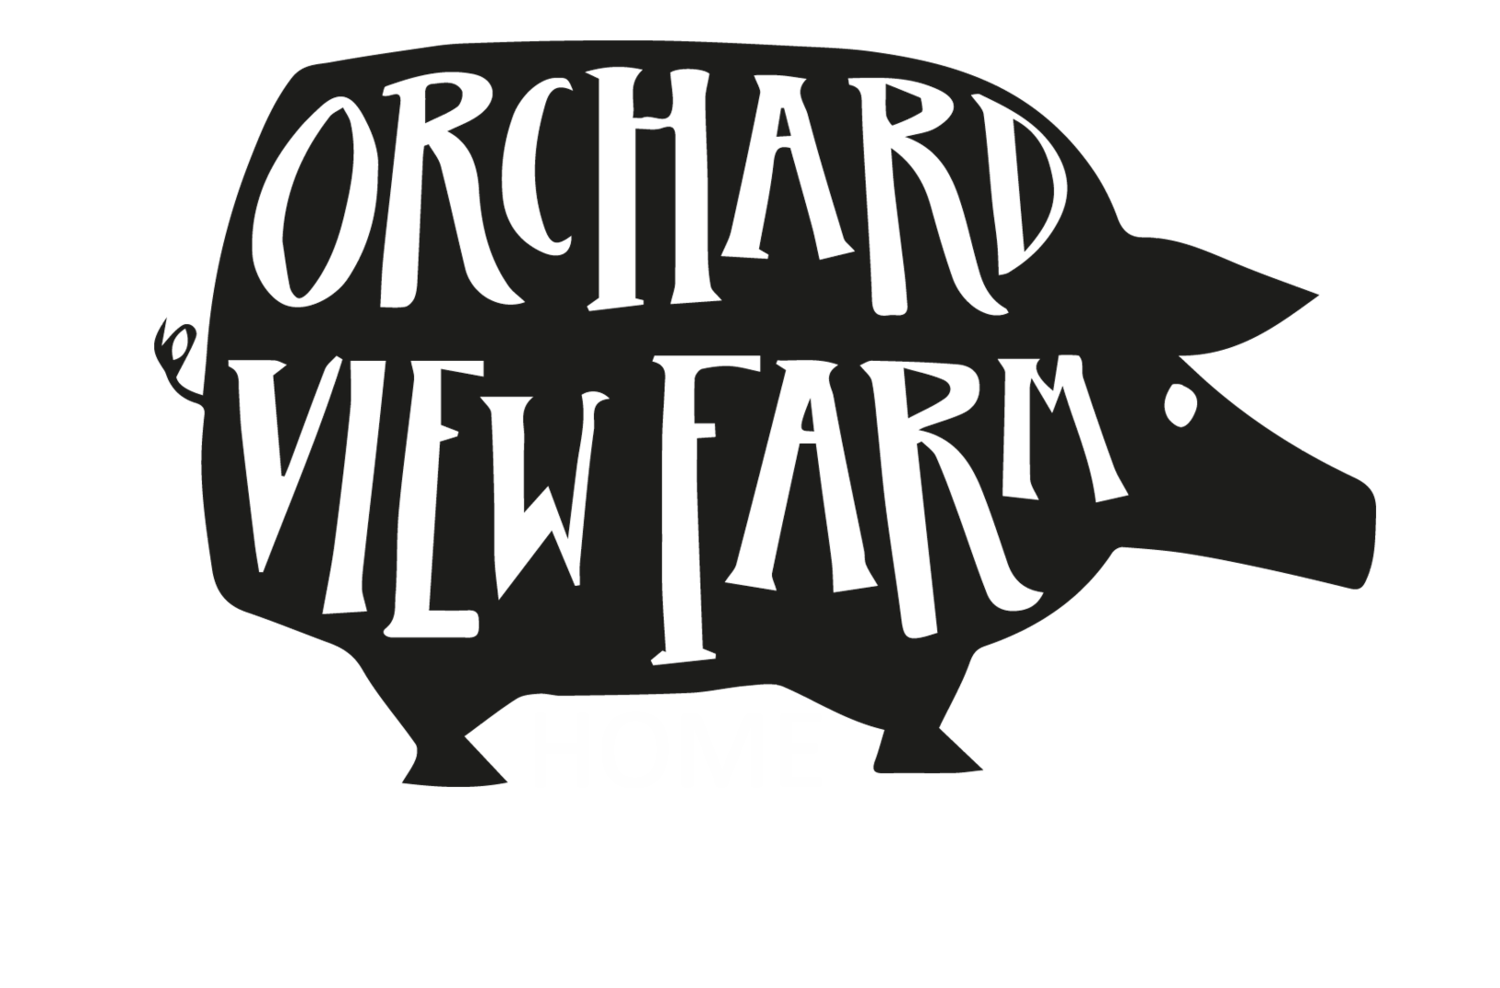 ORCHARD VIEW FARM